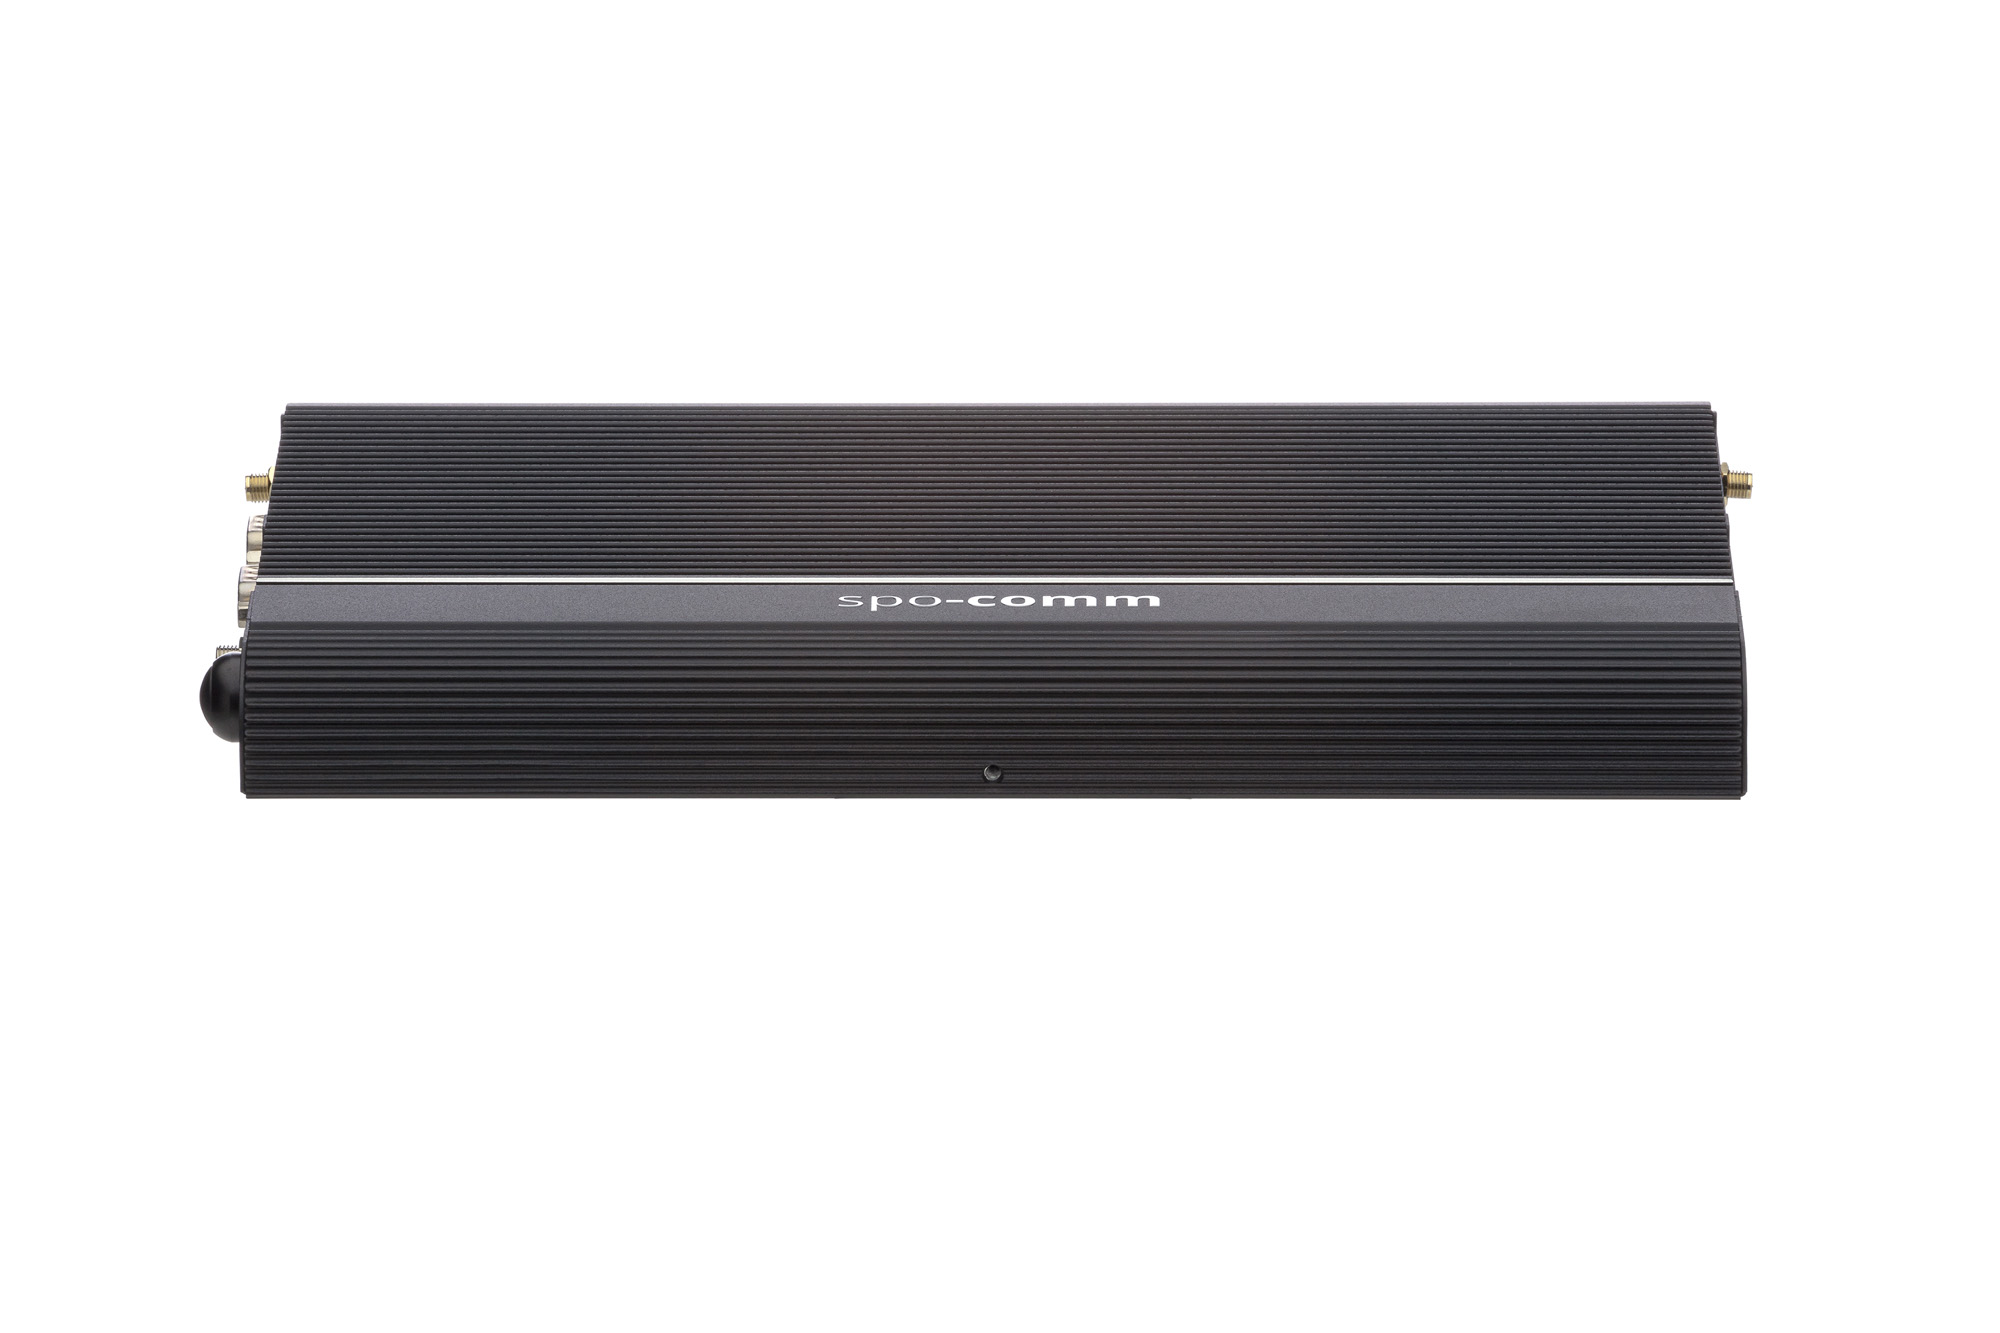 NEW: WINDBOX III Ultra – Our updated allrounder PC 